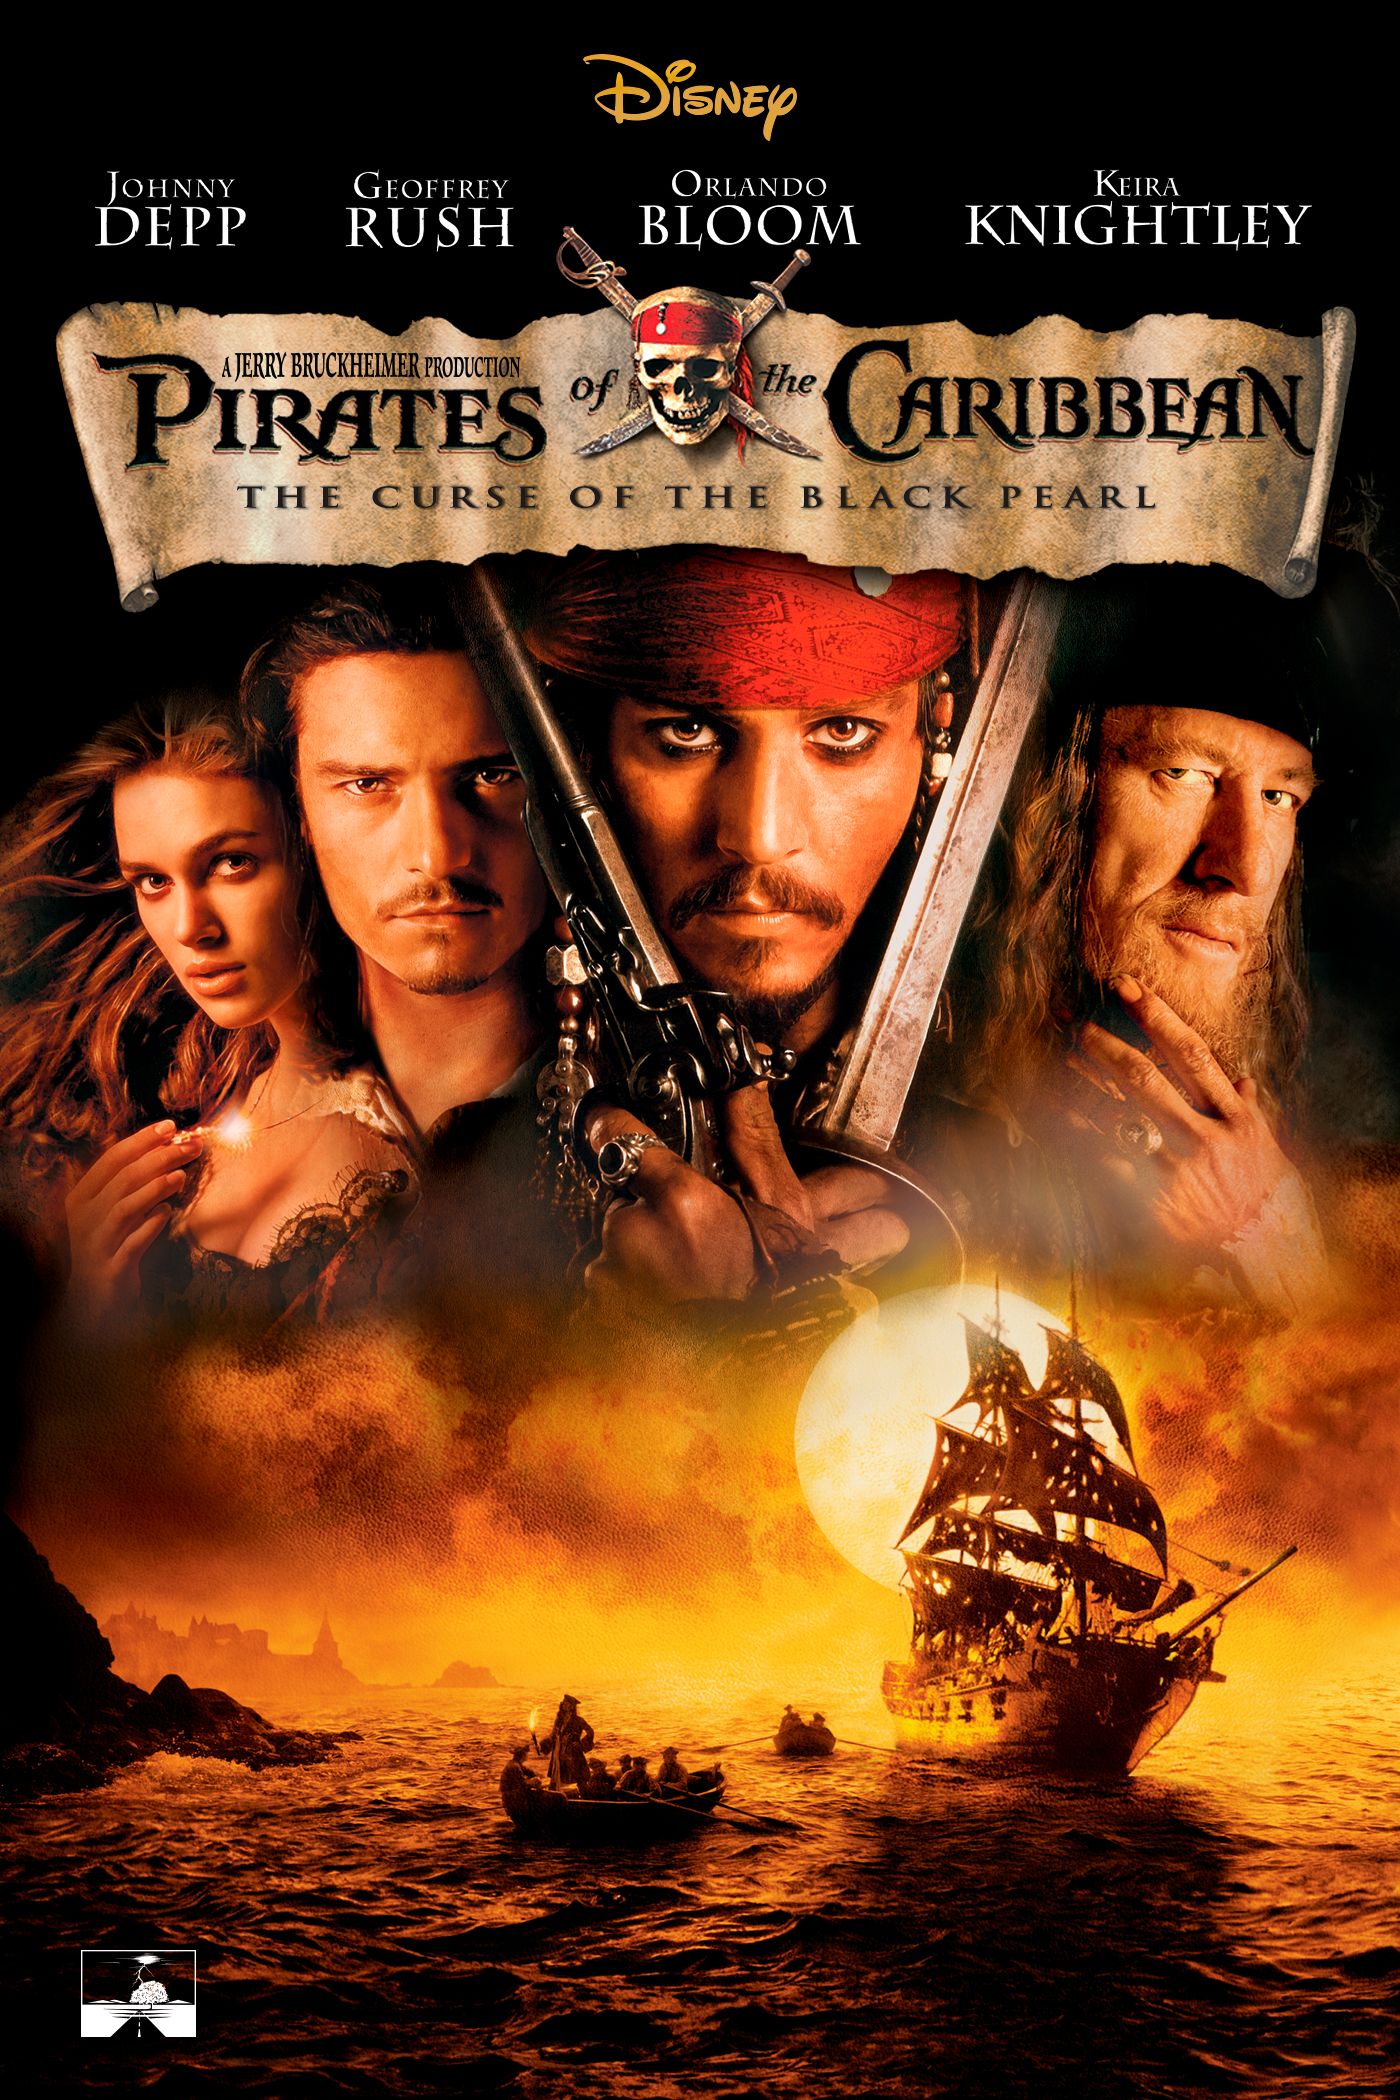 pirates of the caribbean 1 full movie with subtitles